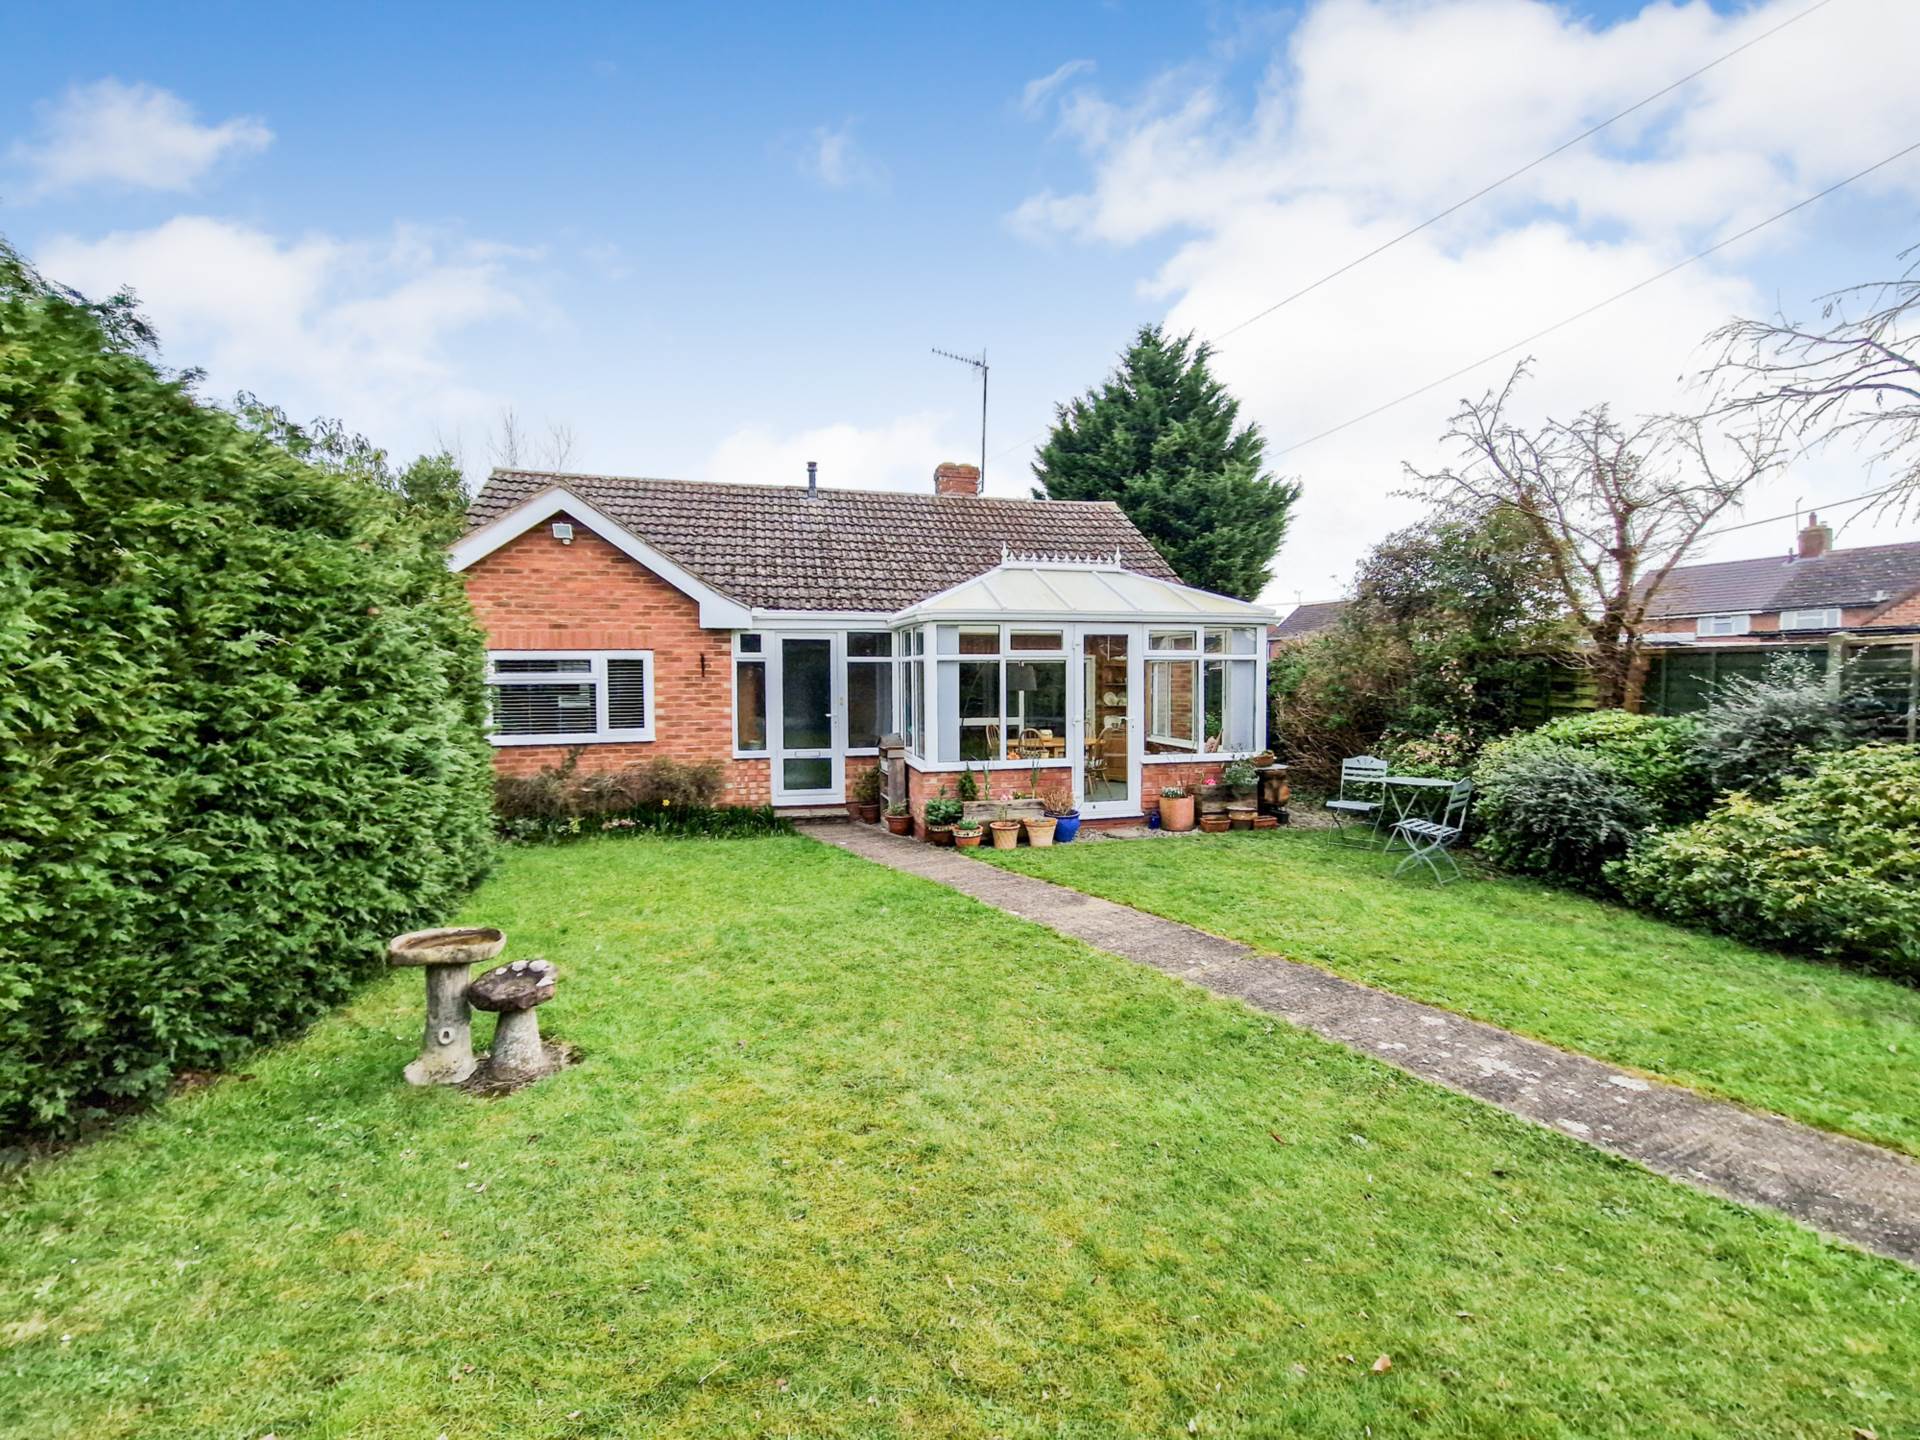 Rectory Road, Upton Upon Severn, Worcestershire, Image 1